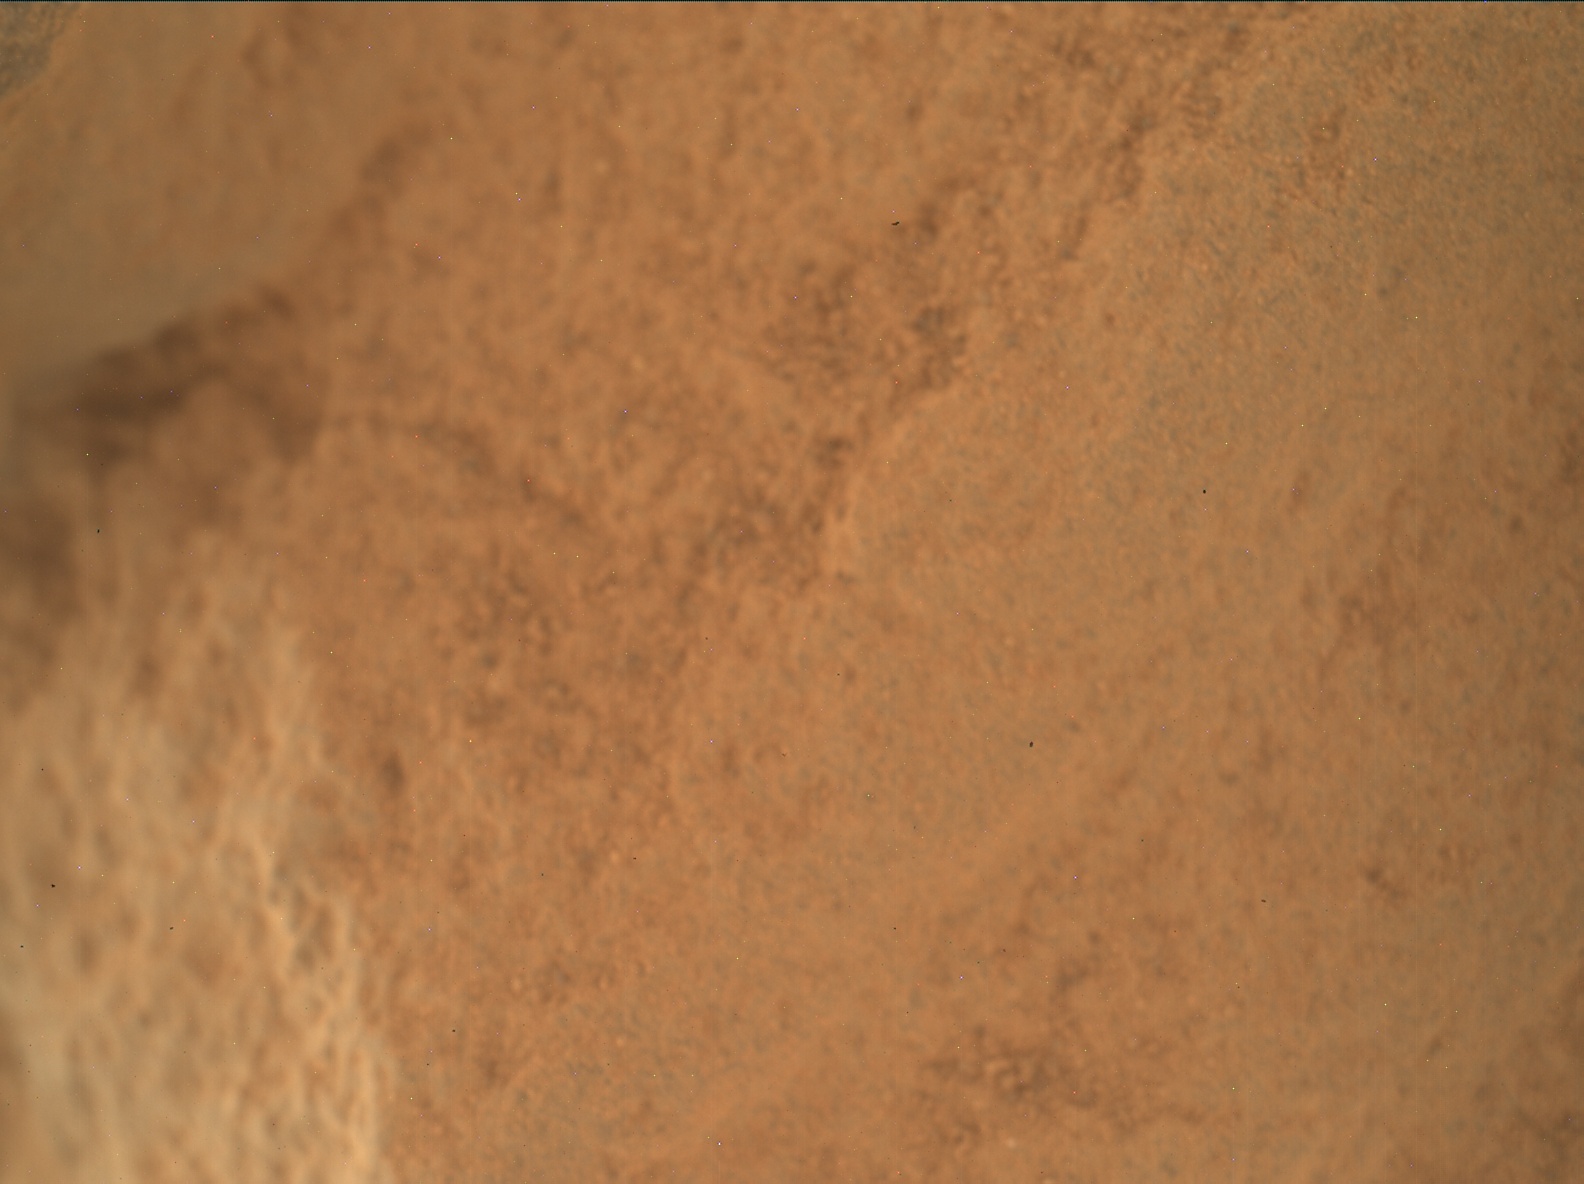 Nasa's Mars rover Curiosity acquired this image using its Mars Hand Lens Imager (MAHLI) on Sol 3444